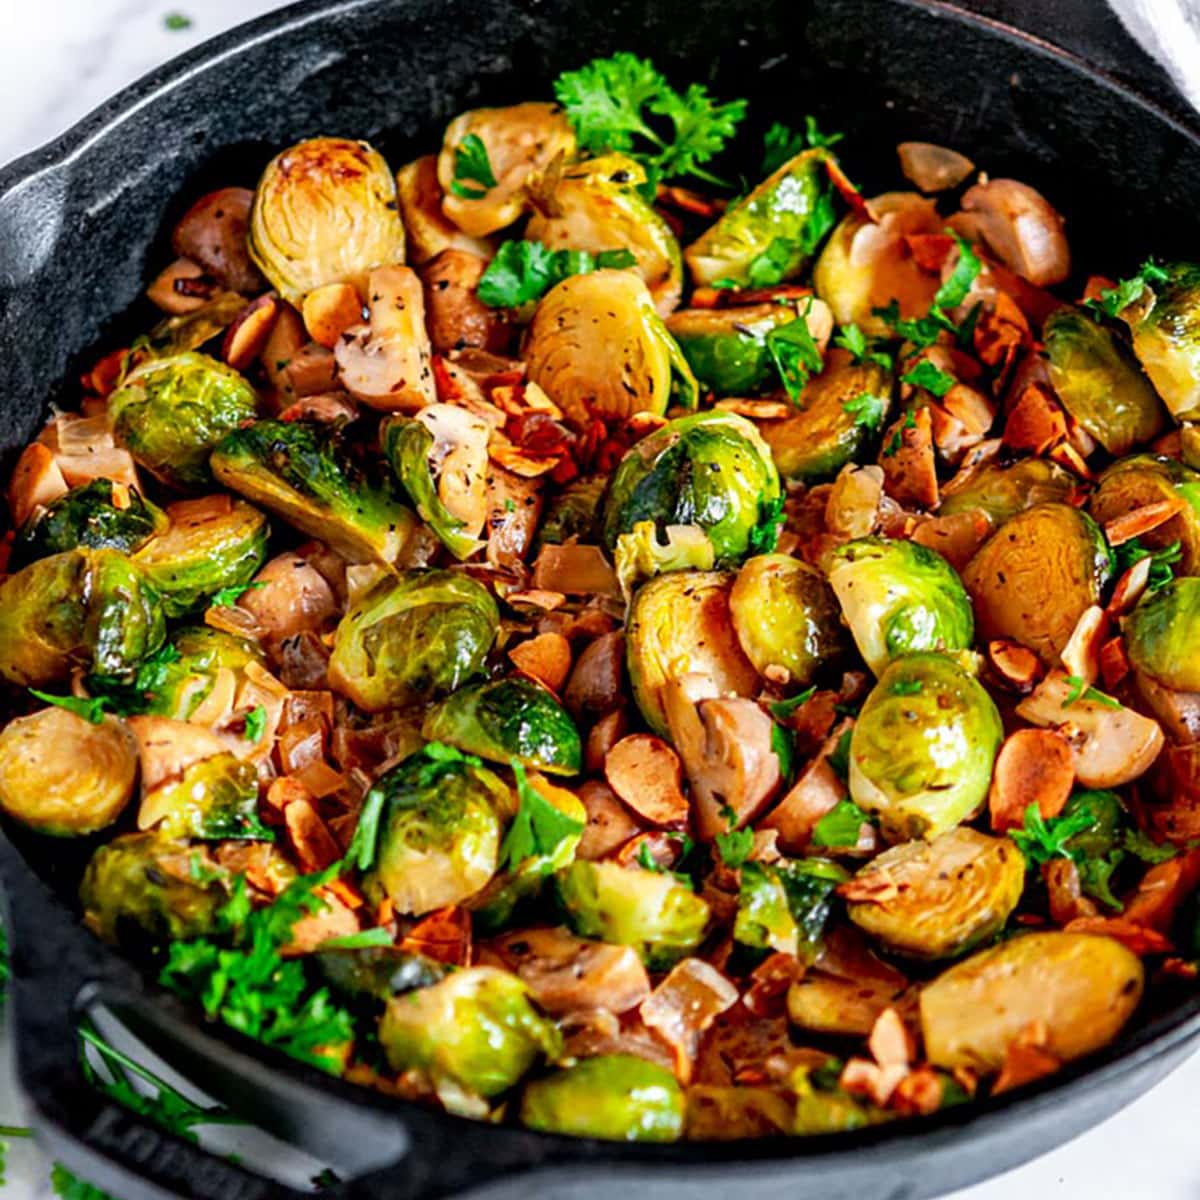 https://www.aberdeenskitchen.com/wp-content/uploads/2020/11/Creamy-Skillet-Brussels-Sprouts-and-Mushrooms-6-Fi-Thumbnail-1200X1200.jpg